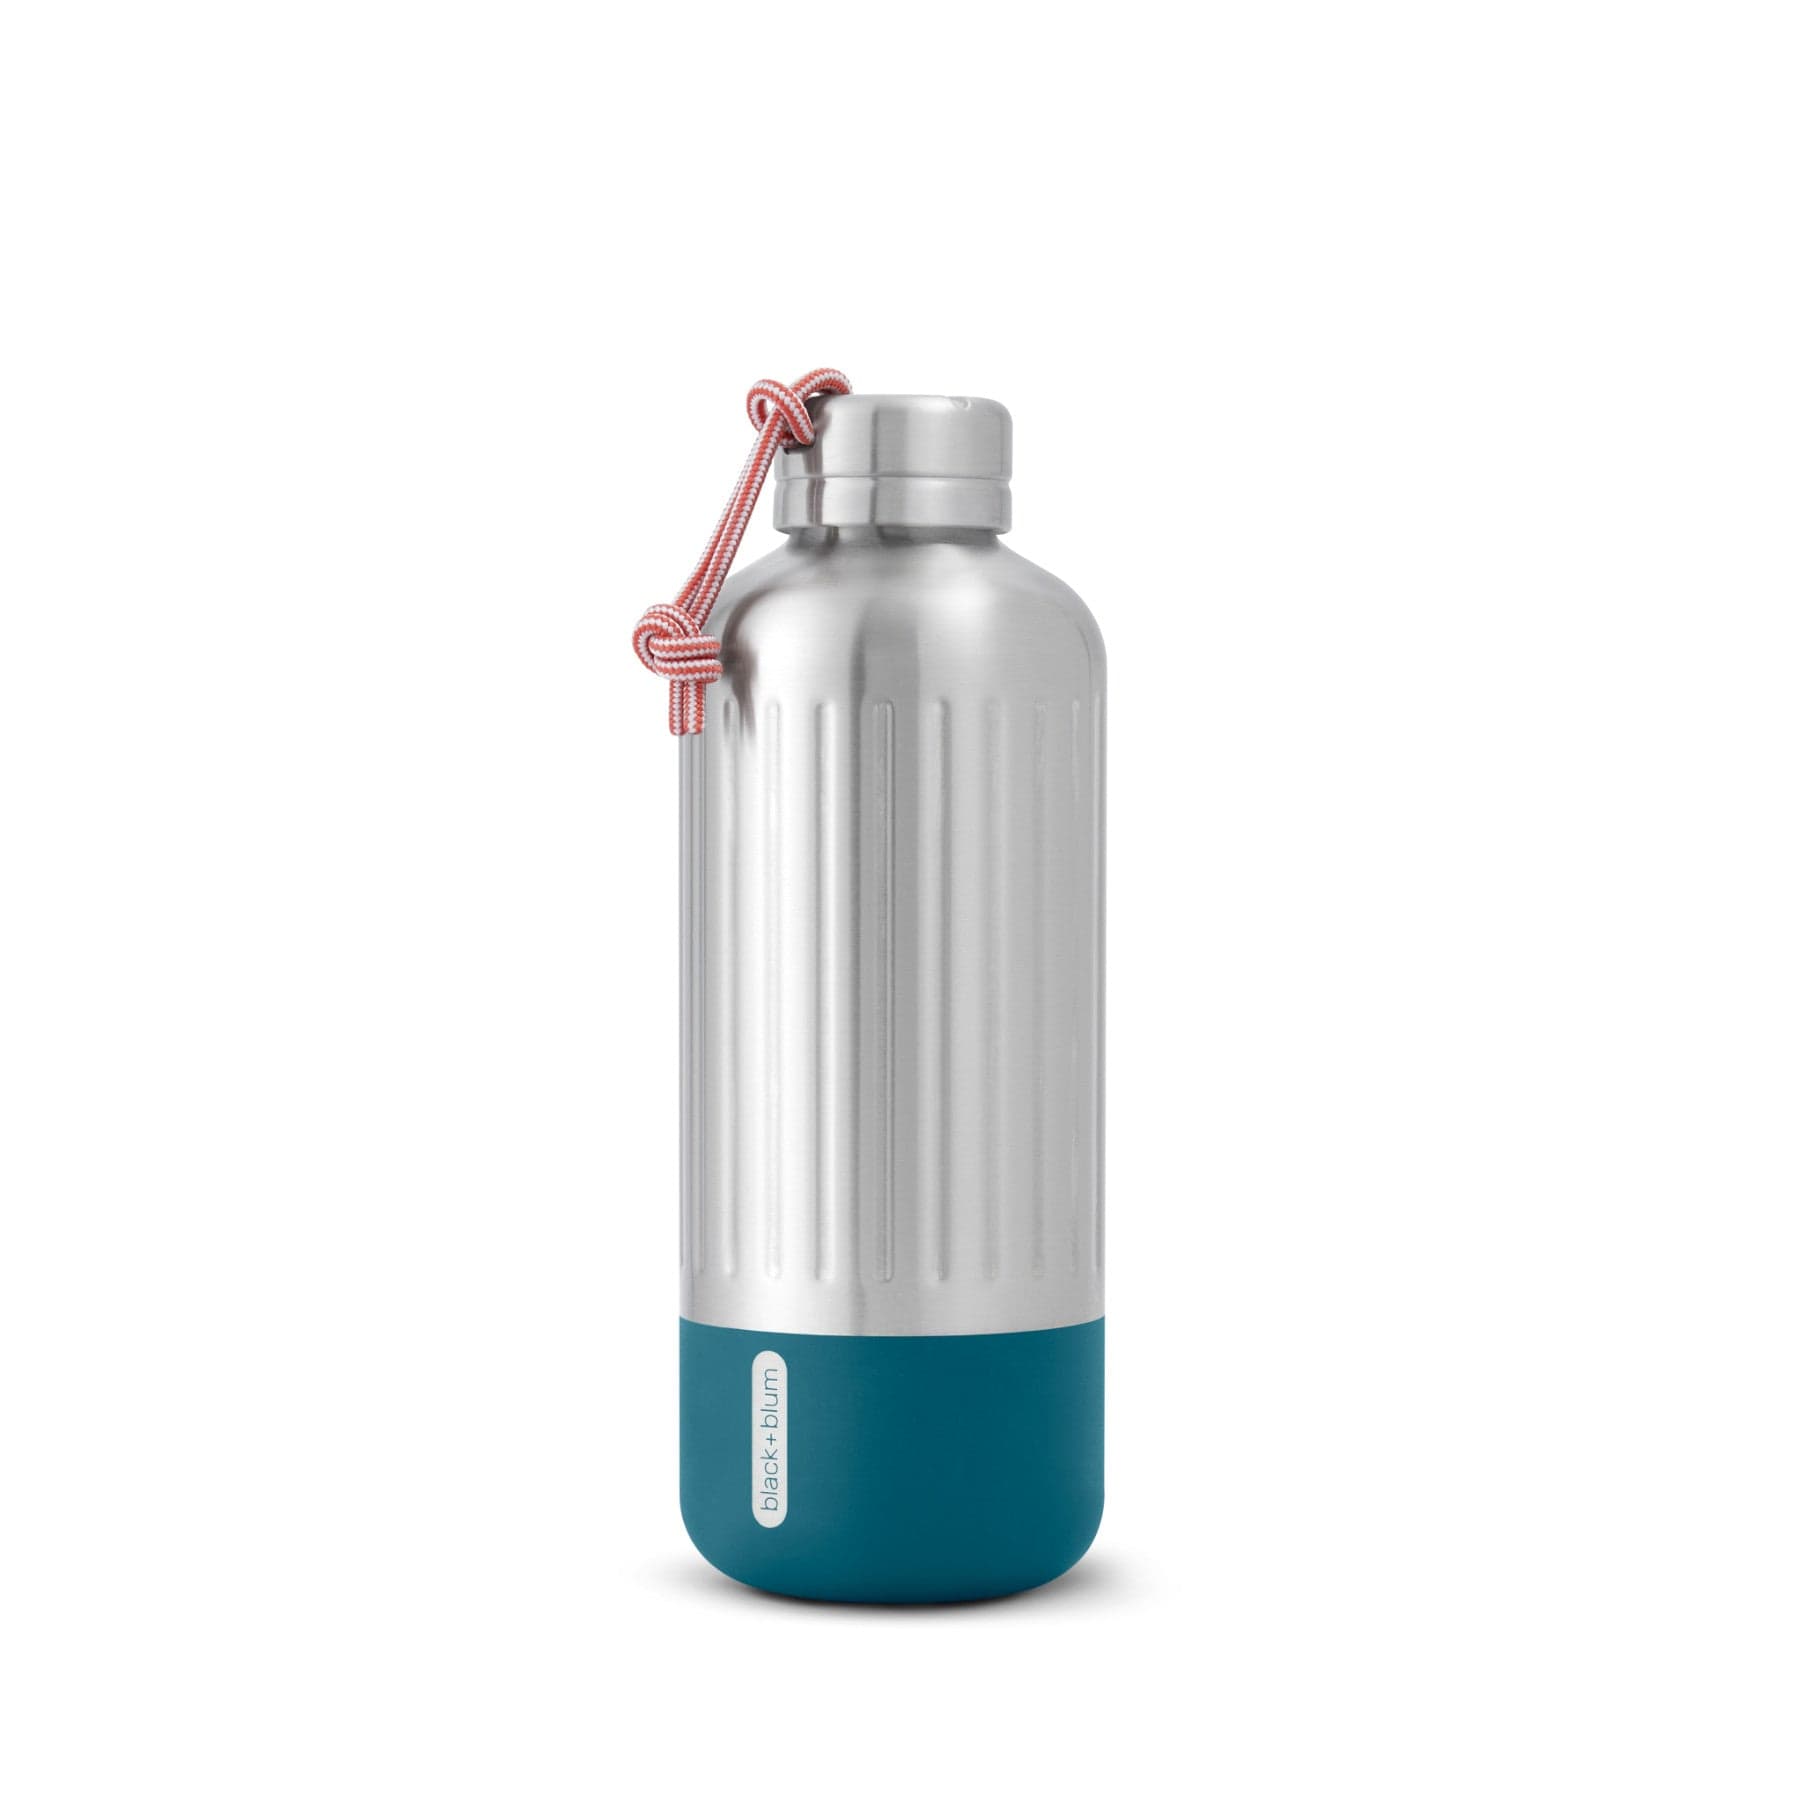 Stainless steel water bottle with red paracord handle and blue base on white background